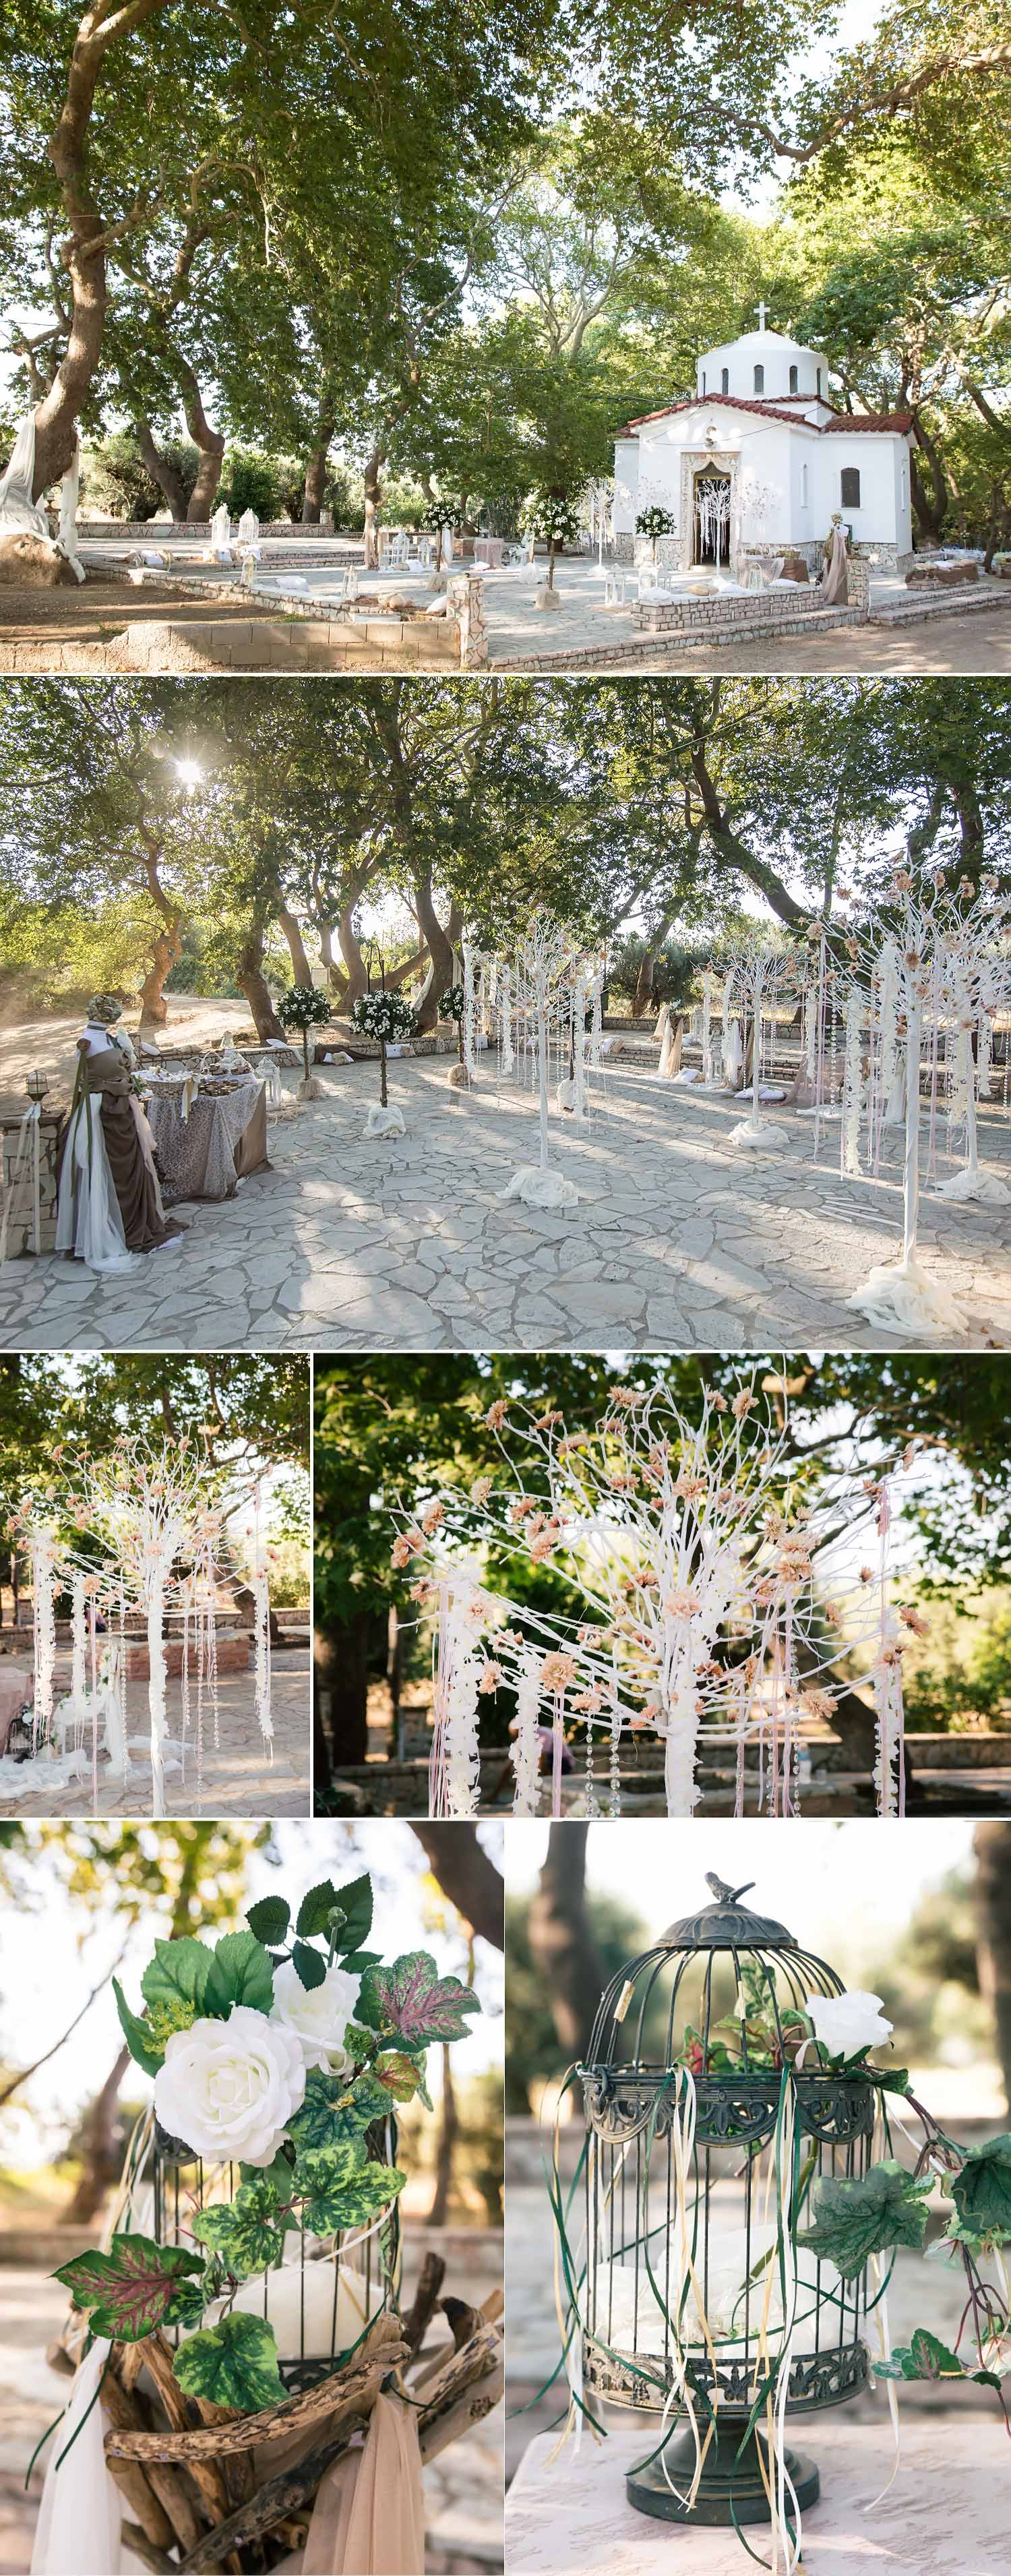 A-magical-wedding-in-a-forest-by-Diamond-Events-planning-company-01